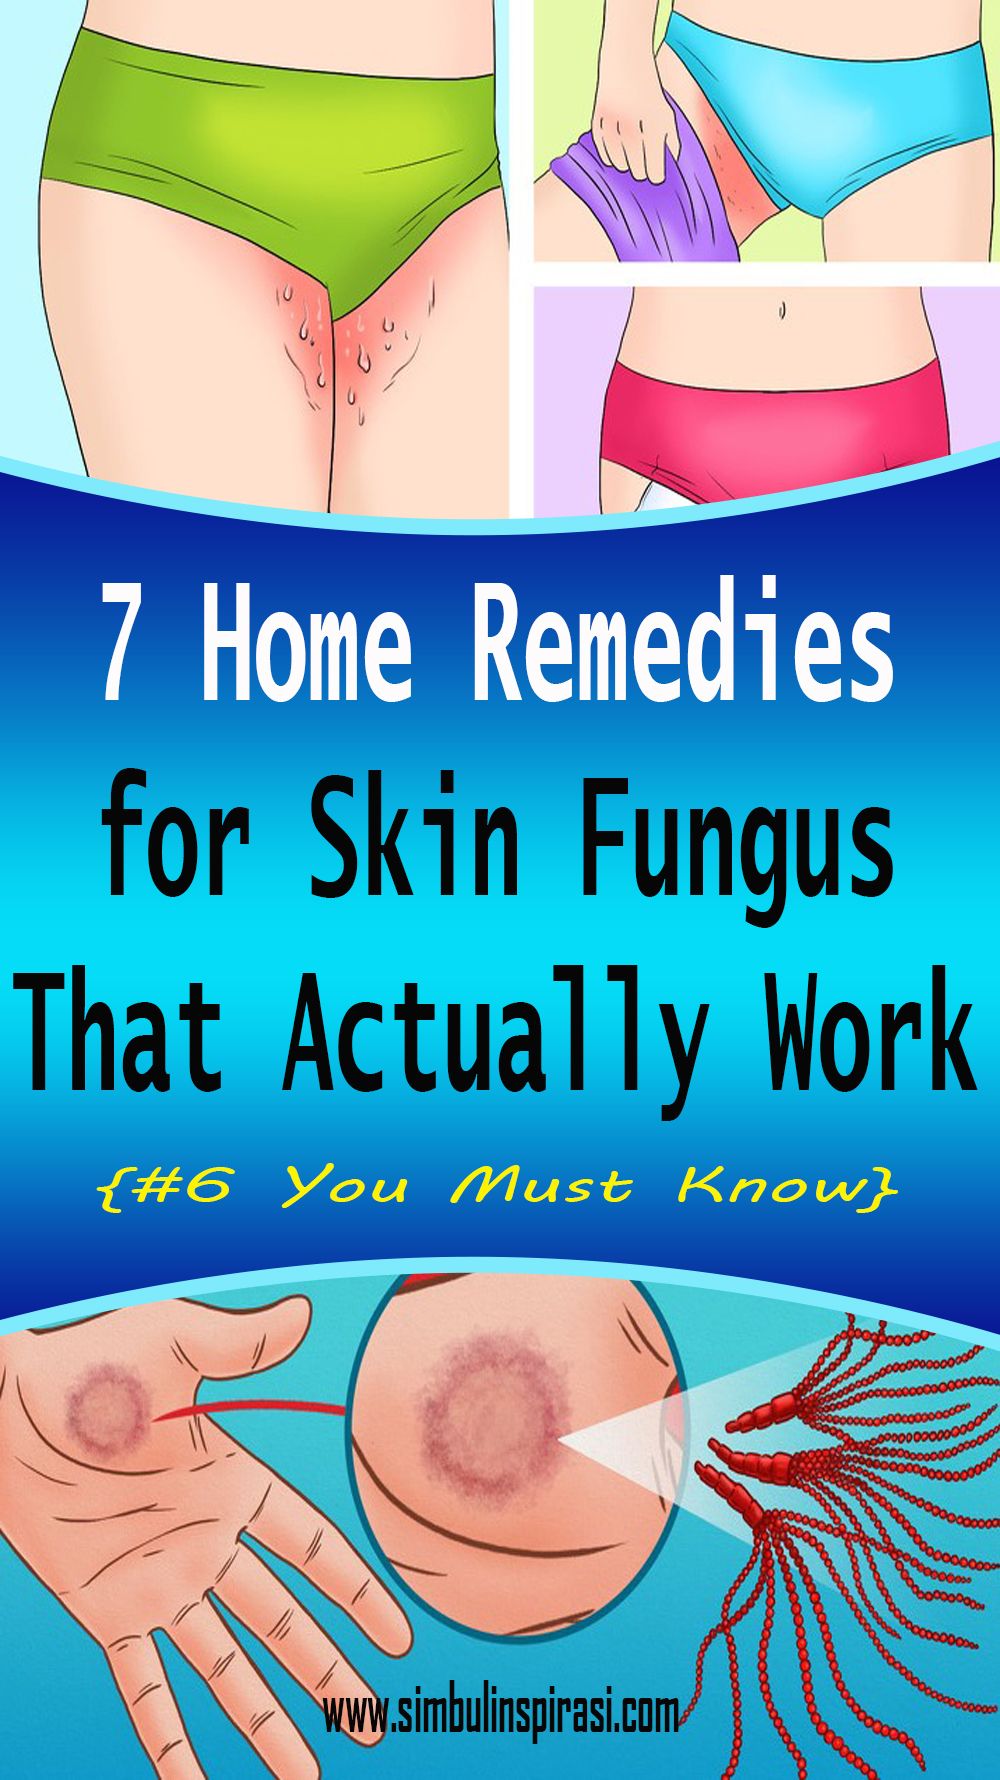 7 Home Remedies for Skin Fungus That Actually Work ...